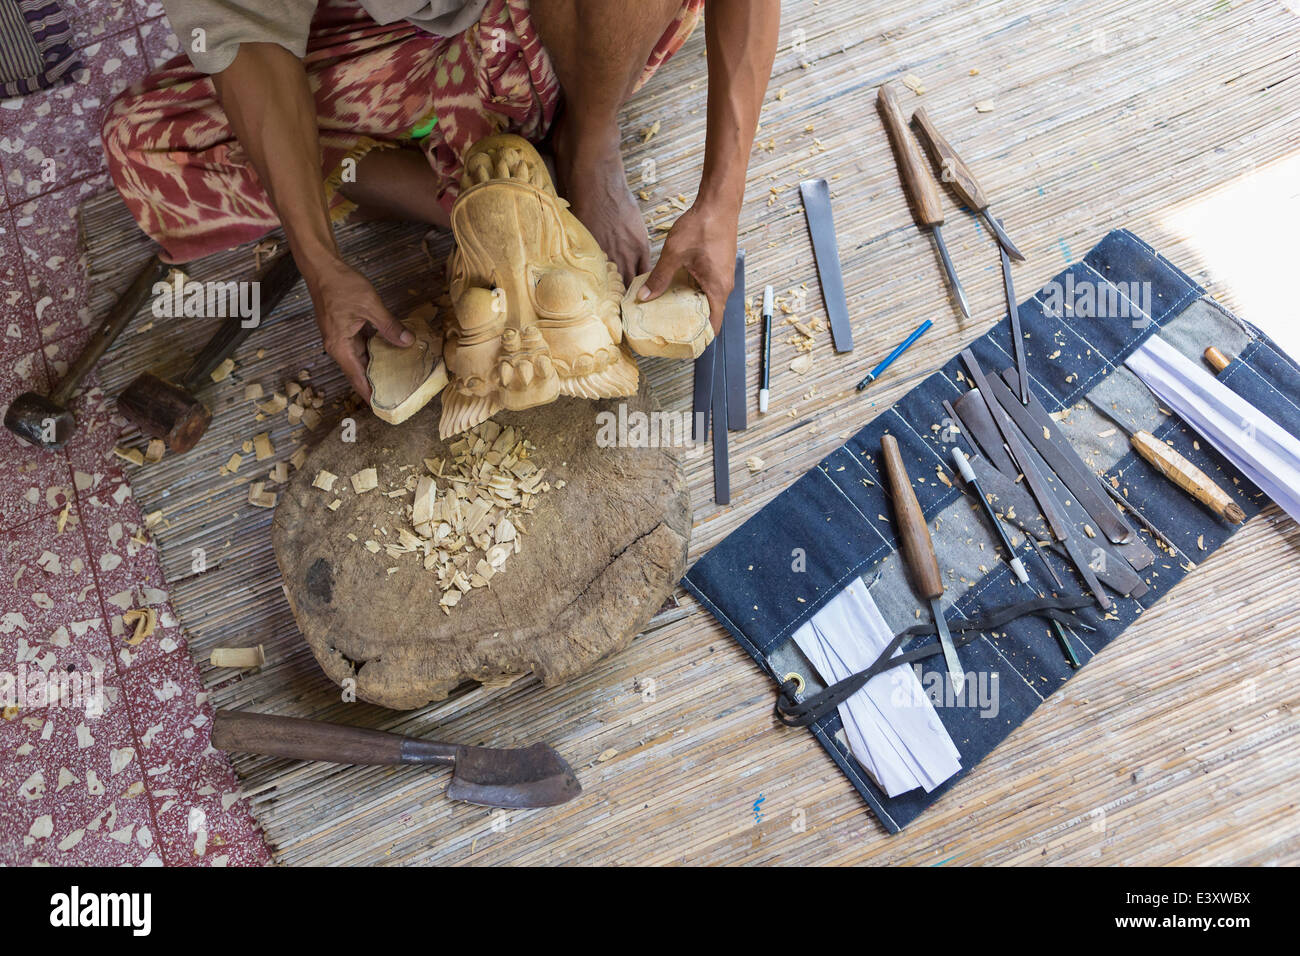 Craftsperson shaping wooden piece in studio Stock Photo